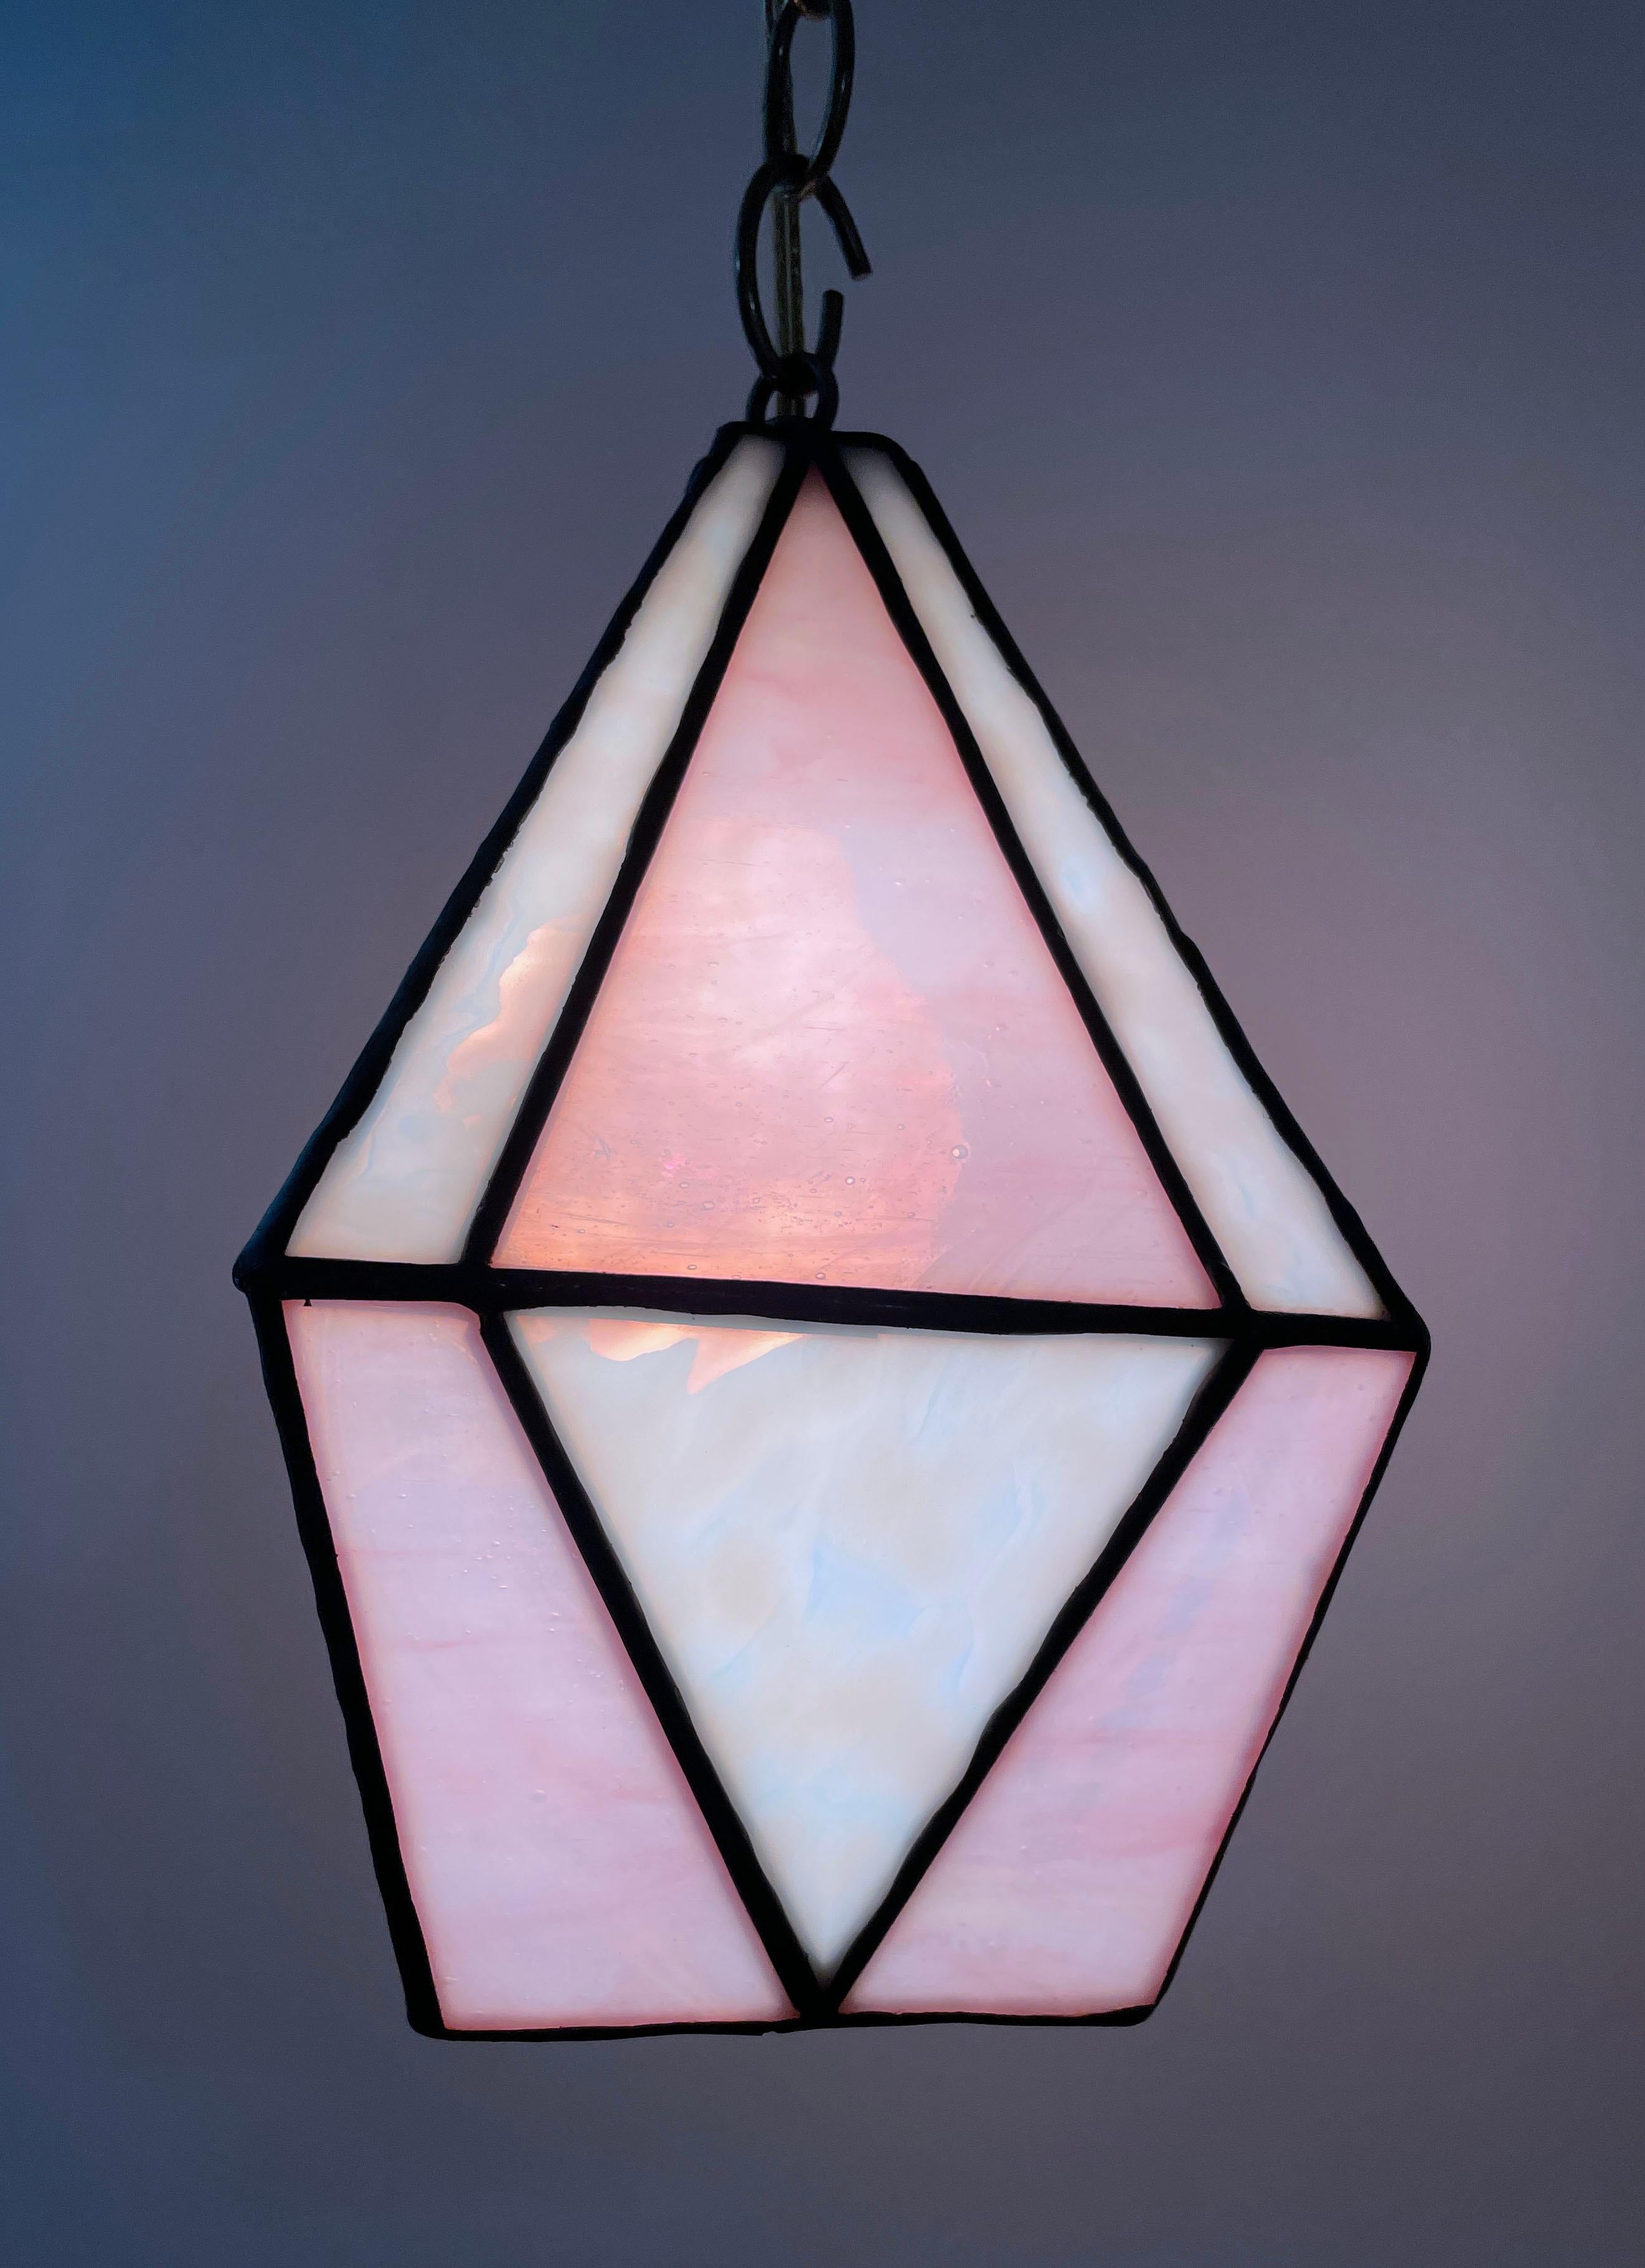 Handcrafted stained glass ceiling lamp with brass hardware, decorators chain and 8ft wall plug with toggle switch. Pink streaky and white ring mottled glass. Prêt à être accroché.  Multiples available but each one is slightly unique by the hand made